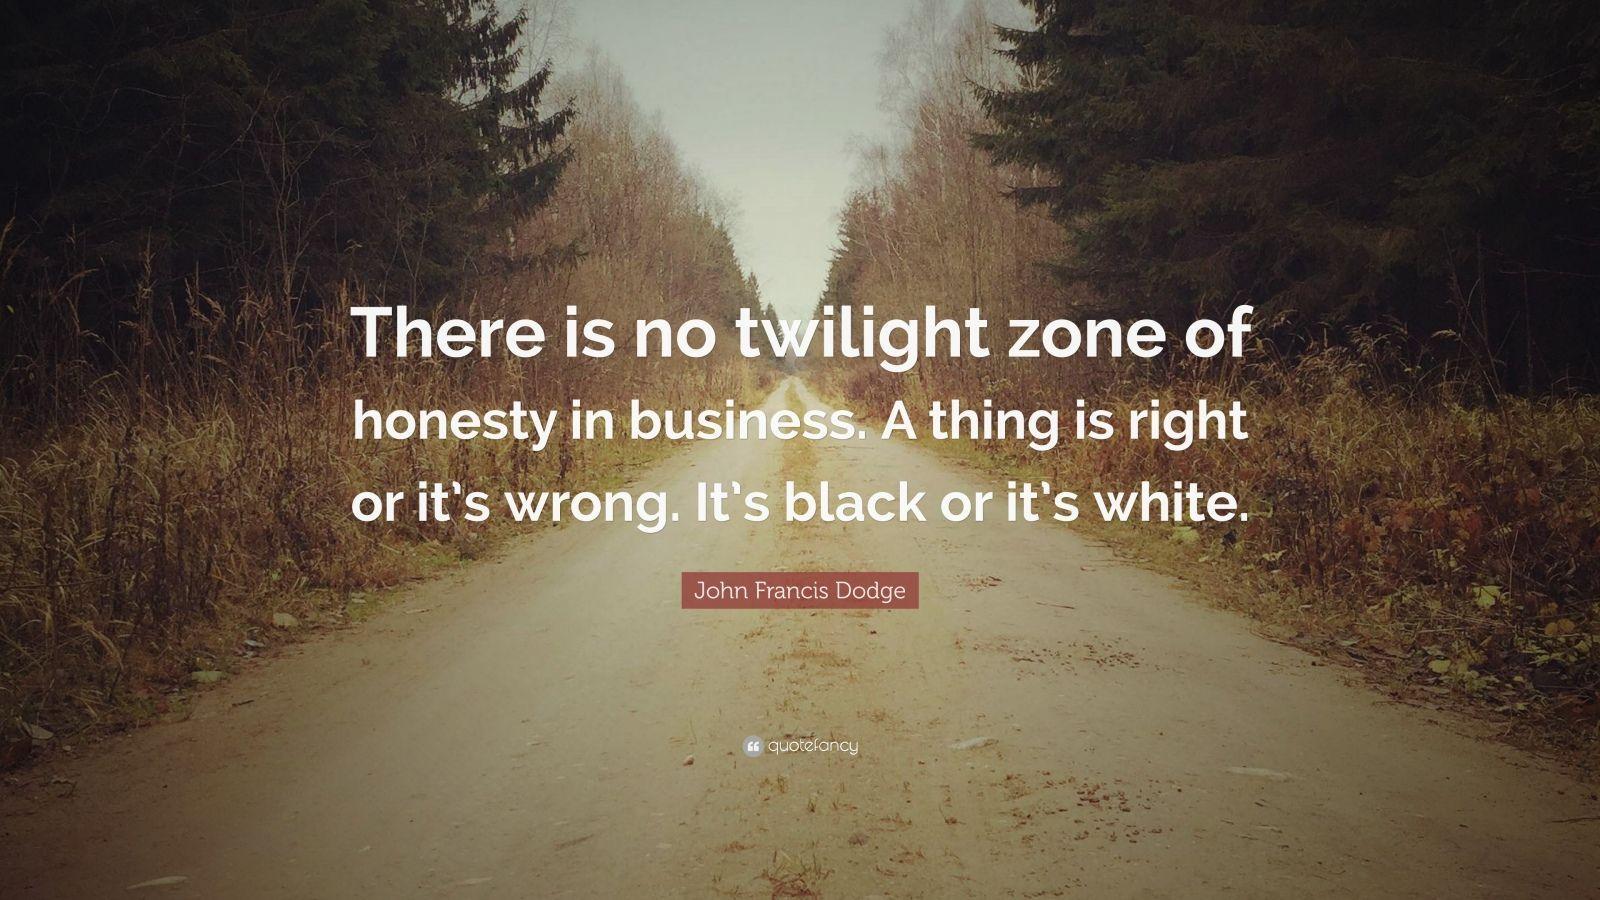 John Francis Dodge Quote: “There is no twilight zone of honesty